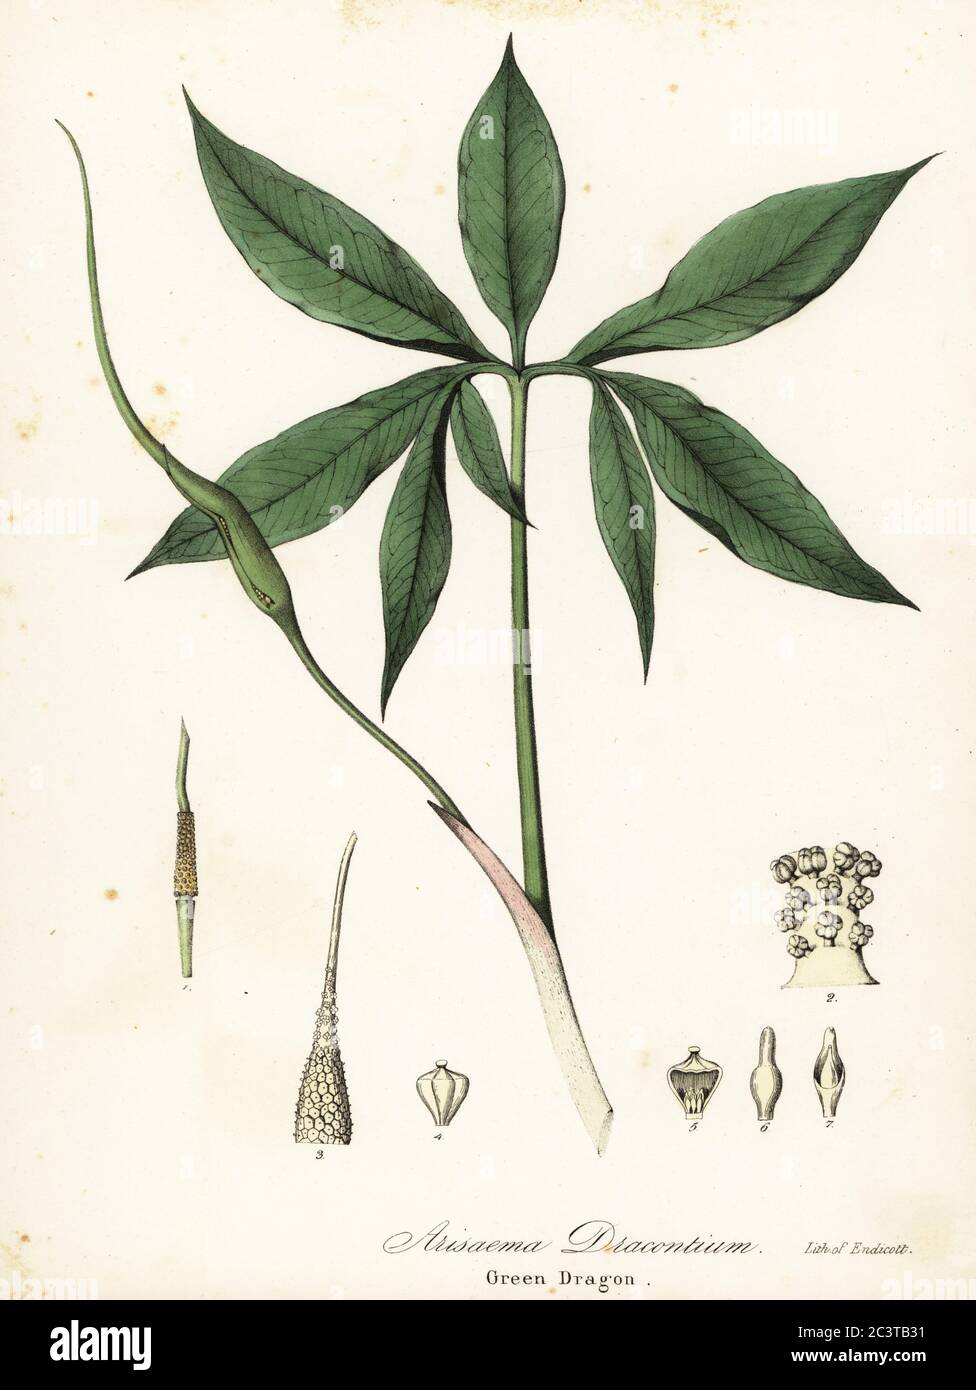 Green dragon or dragon-root, Arisaema dracontium. Handcoloured lithograph by Endicott after a botanical illustration from John Torrey’s A Flora of the State of New York, Carroll and Cook, Albany, 1843. The plates drawn by John Torrey, Agnes Mitchell, Elizabeth Paoley and Swinton. John Torrey was an American botanist, chemist and physician 1796-1873. Stock Photo